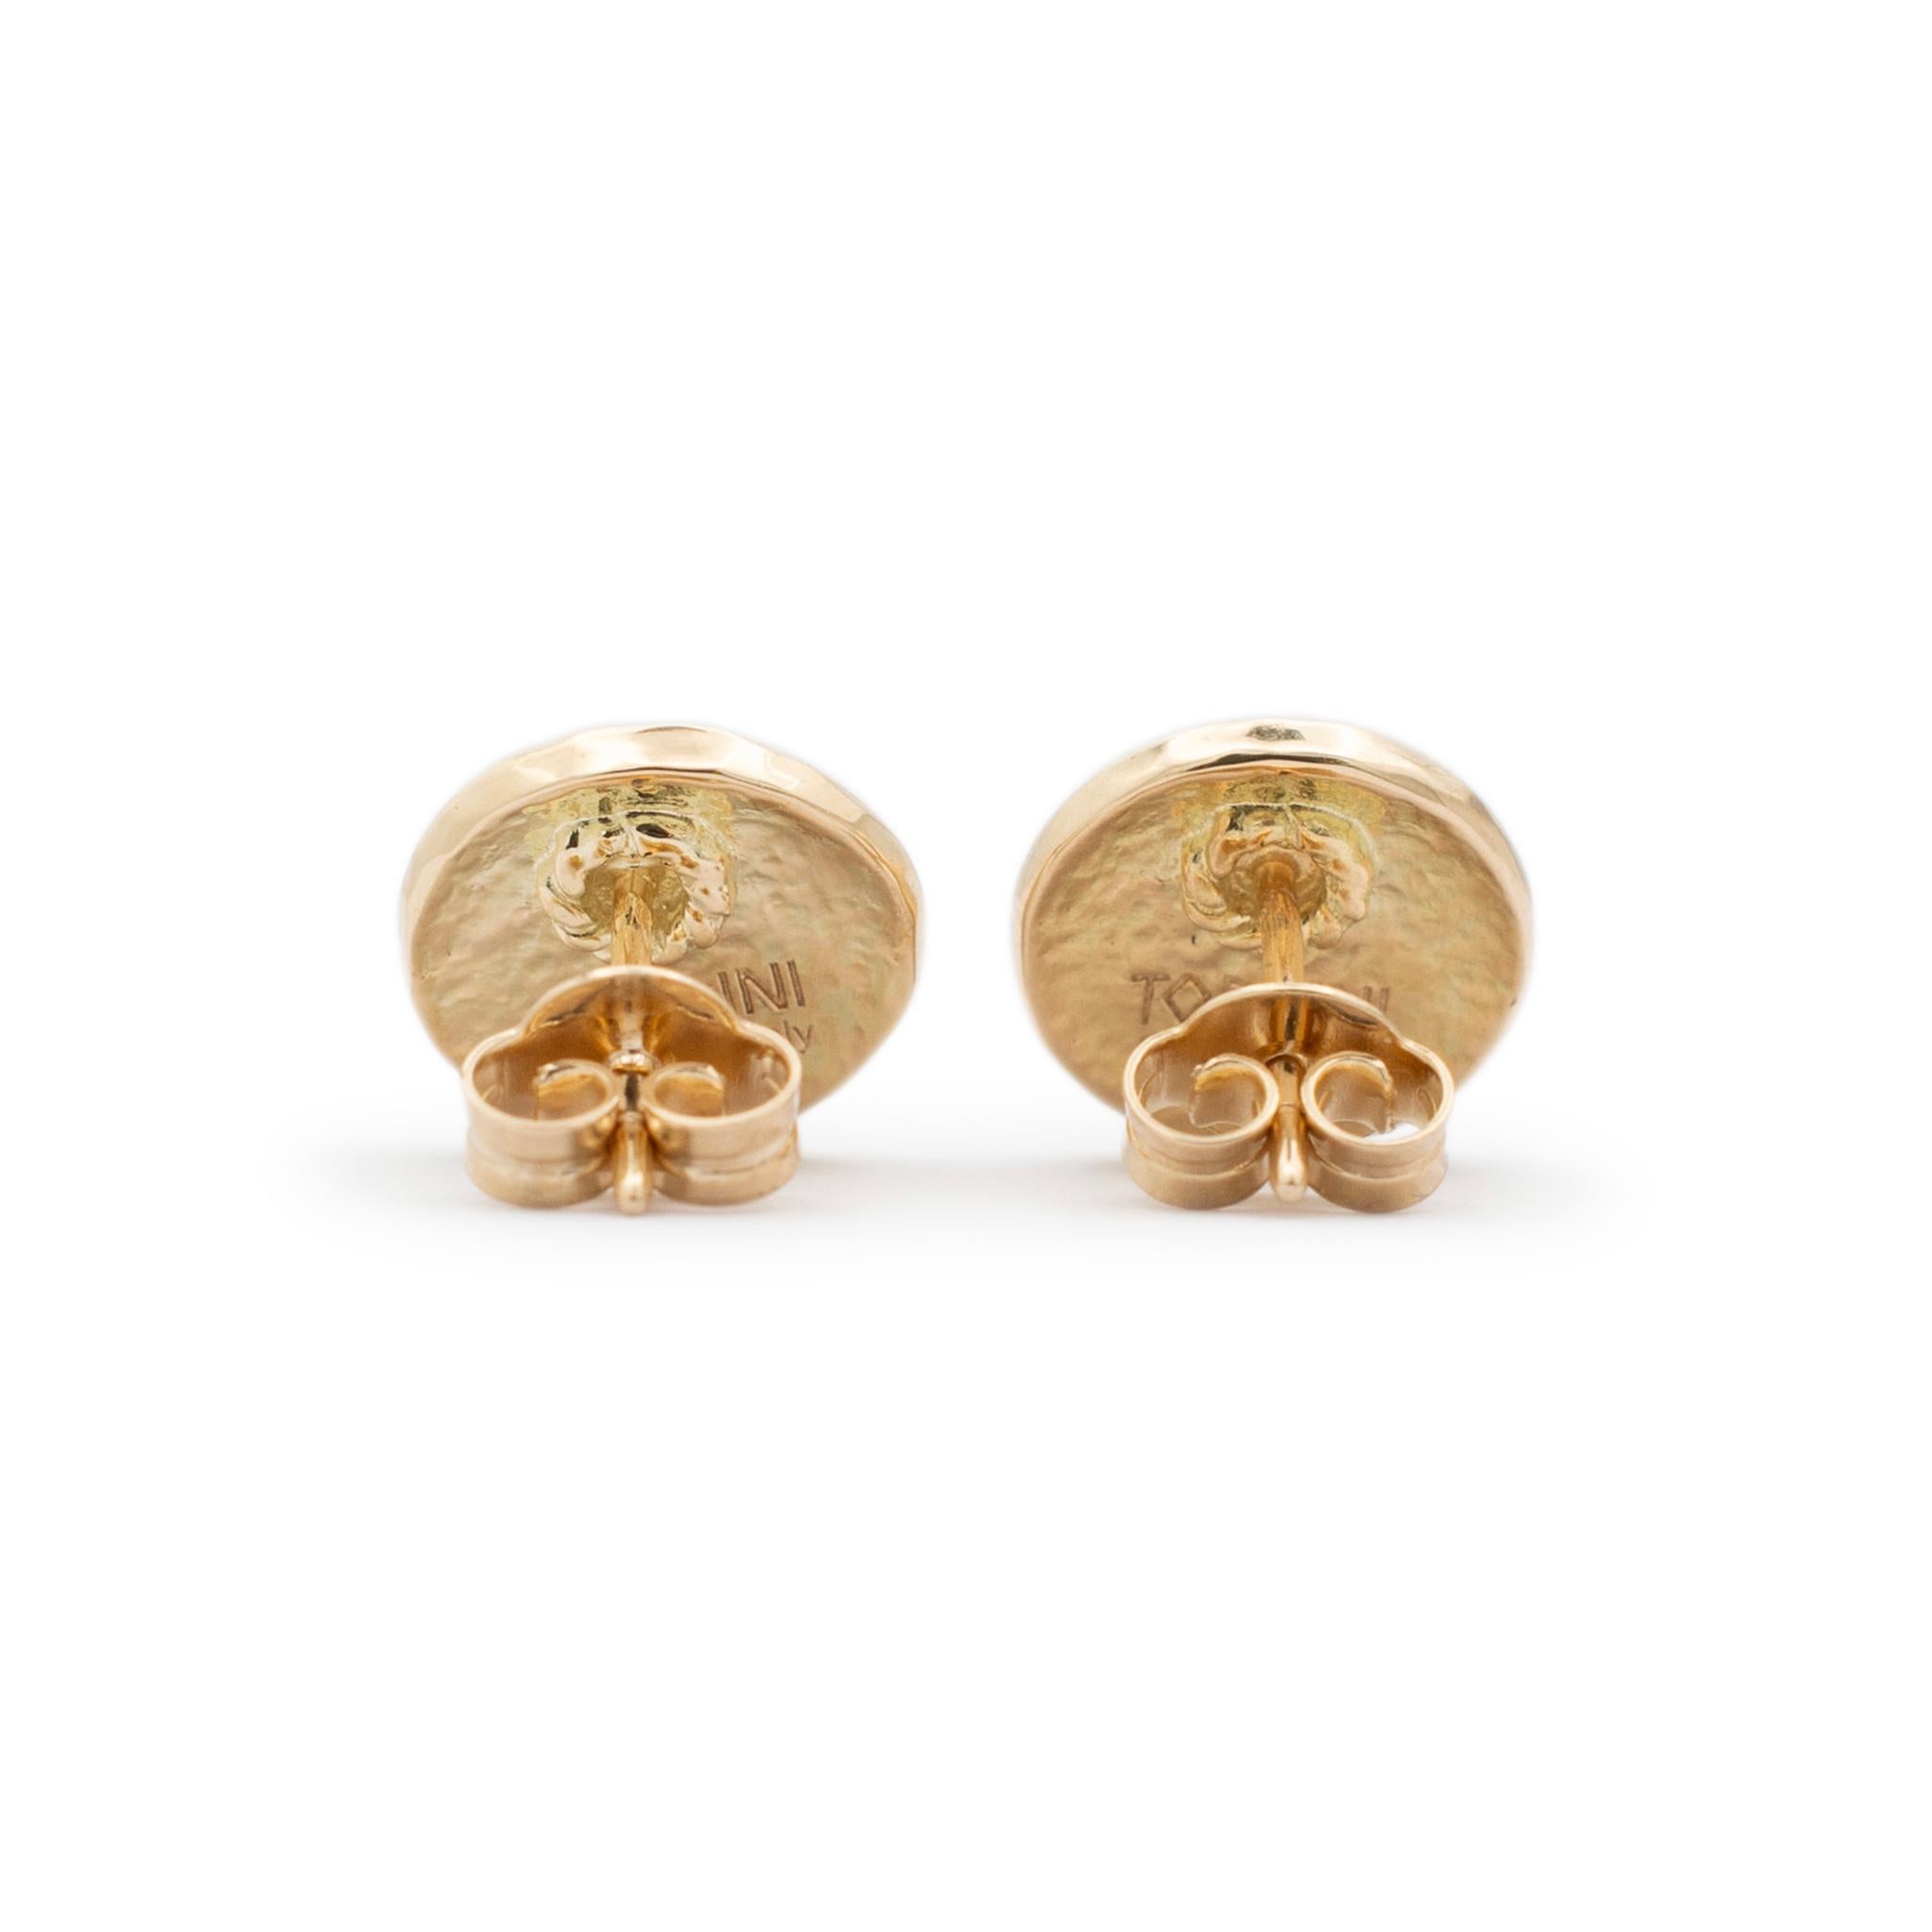 Brand: Torrini

Gender: Ladies

Metal Type: 14K Yellow Gold

Length: 0.50 Inches

Diameter: 11.00 mm

Weight: 3.23 grams

Ladies 14K yellow gold vintage stud earrings with push backs. The metal was tested and determined to be 14K yellow gold.